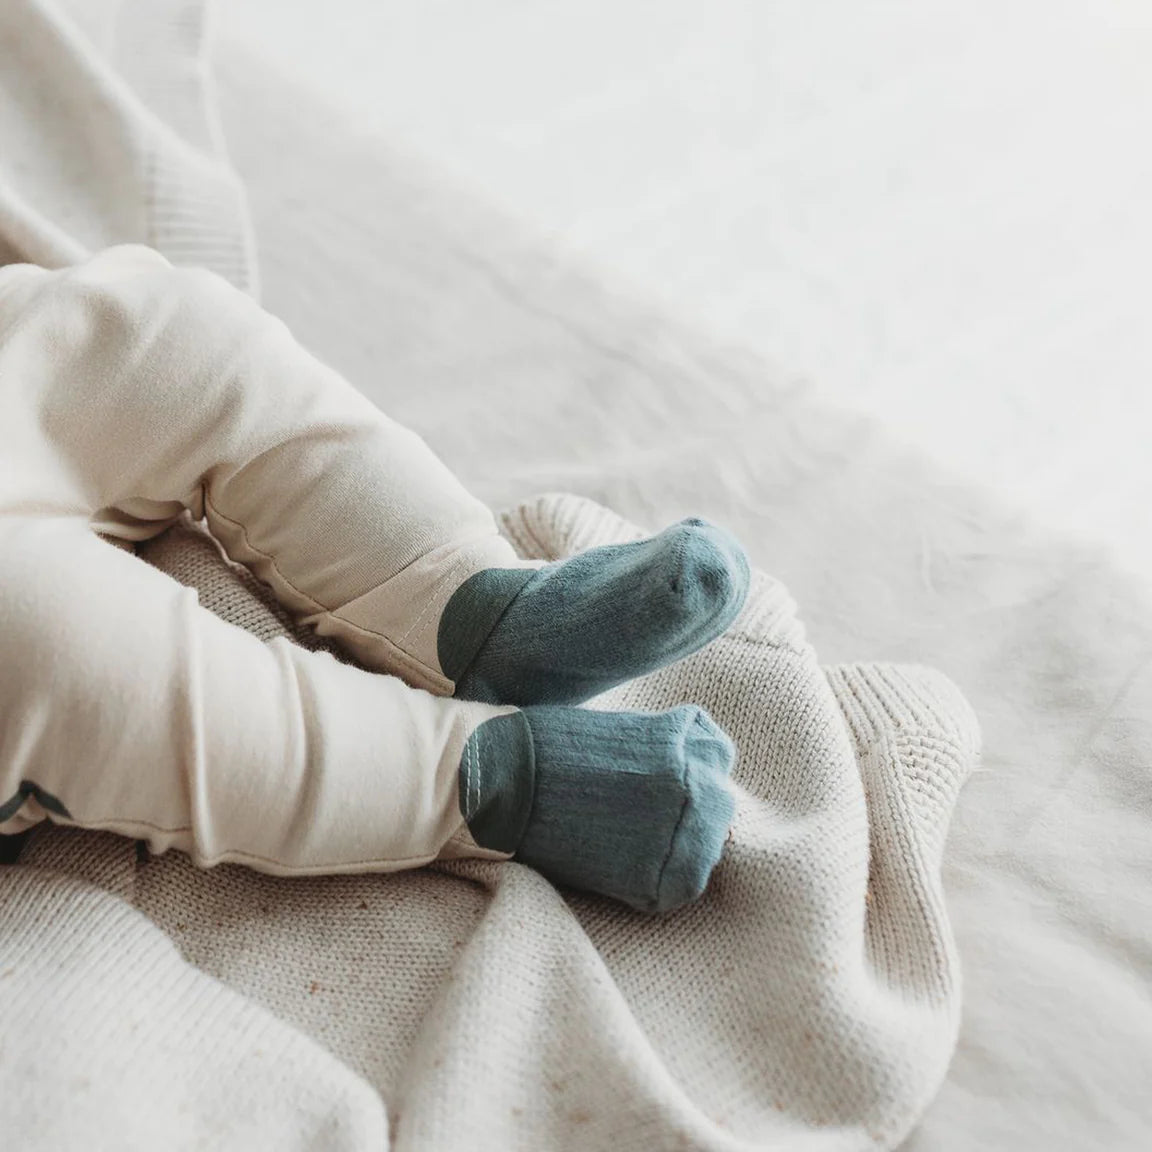 organic cotton baby socks - angus and dudley